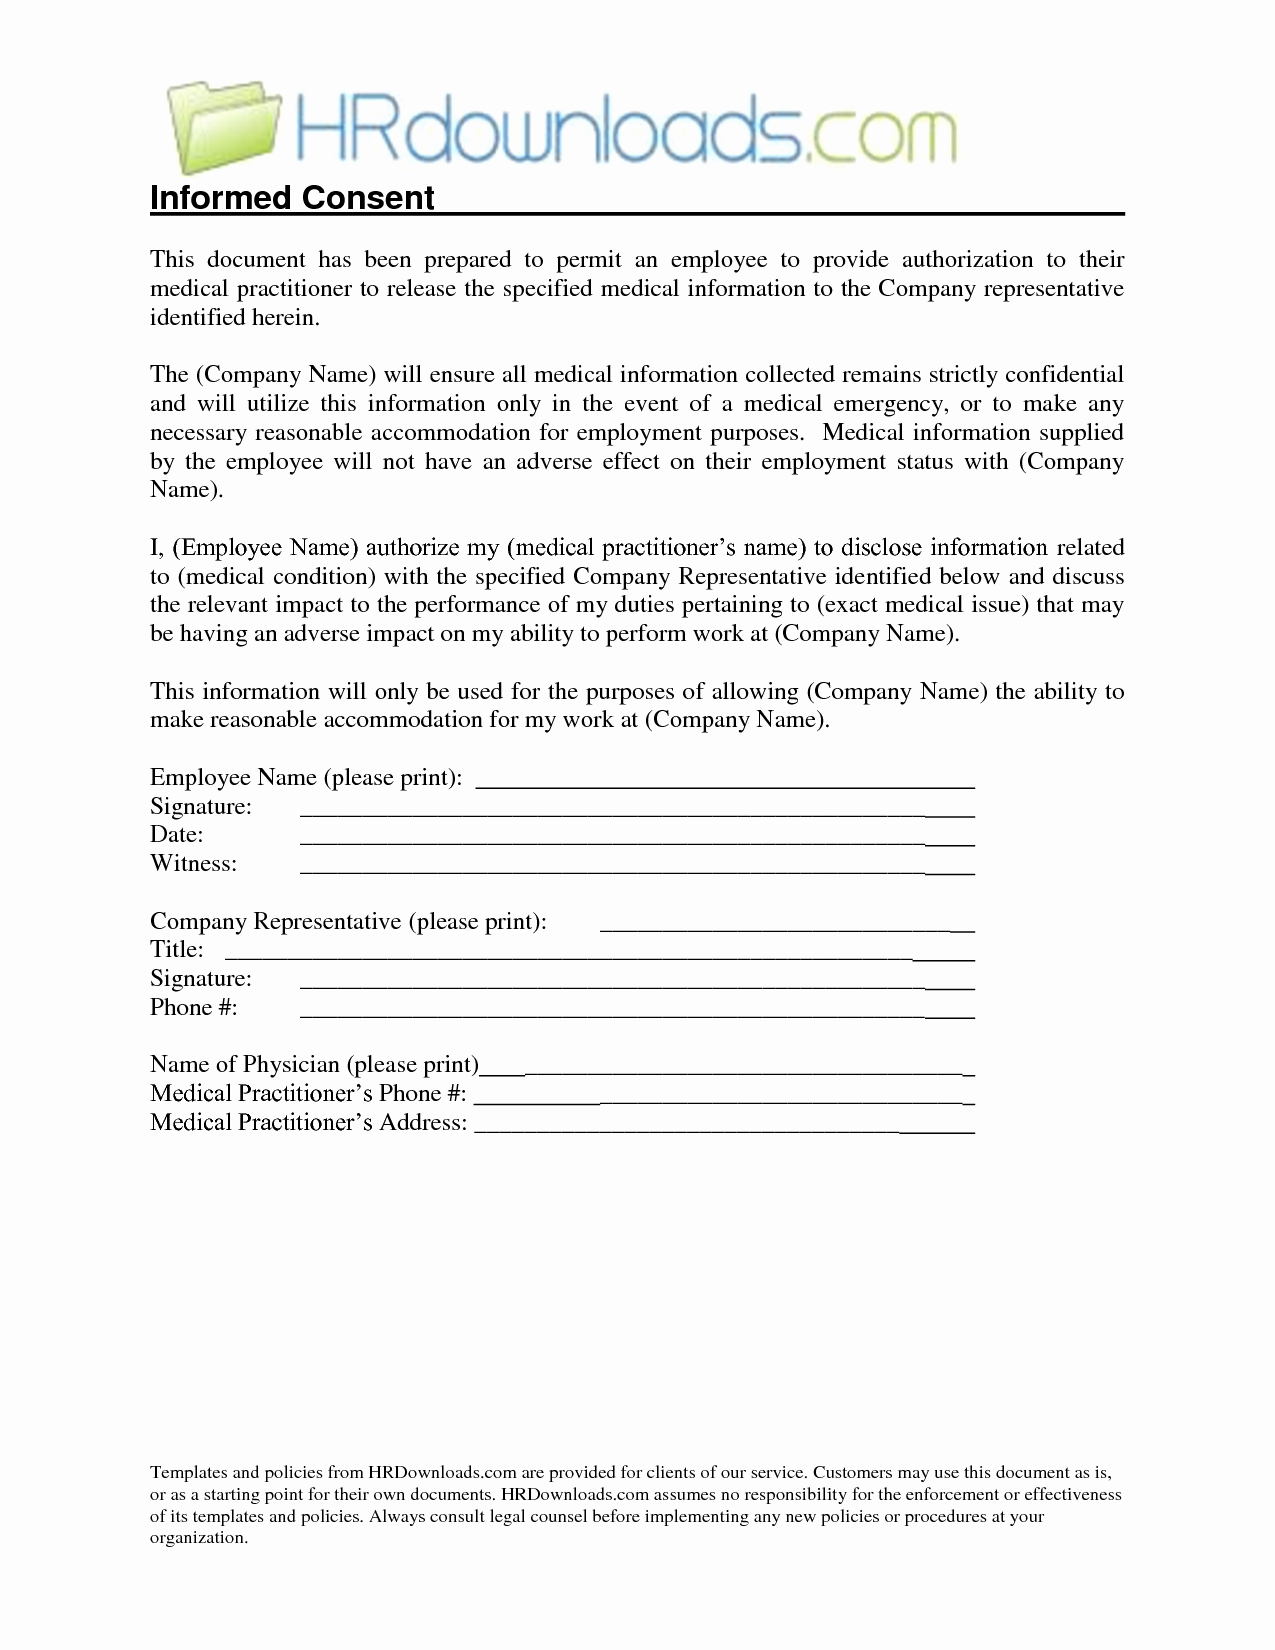 Medical Records Release form Template New Medical Release Information form Template